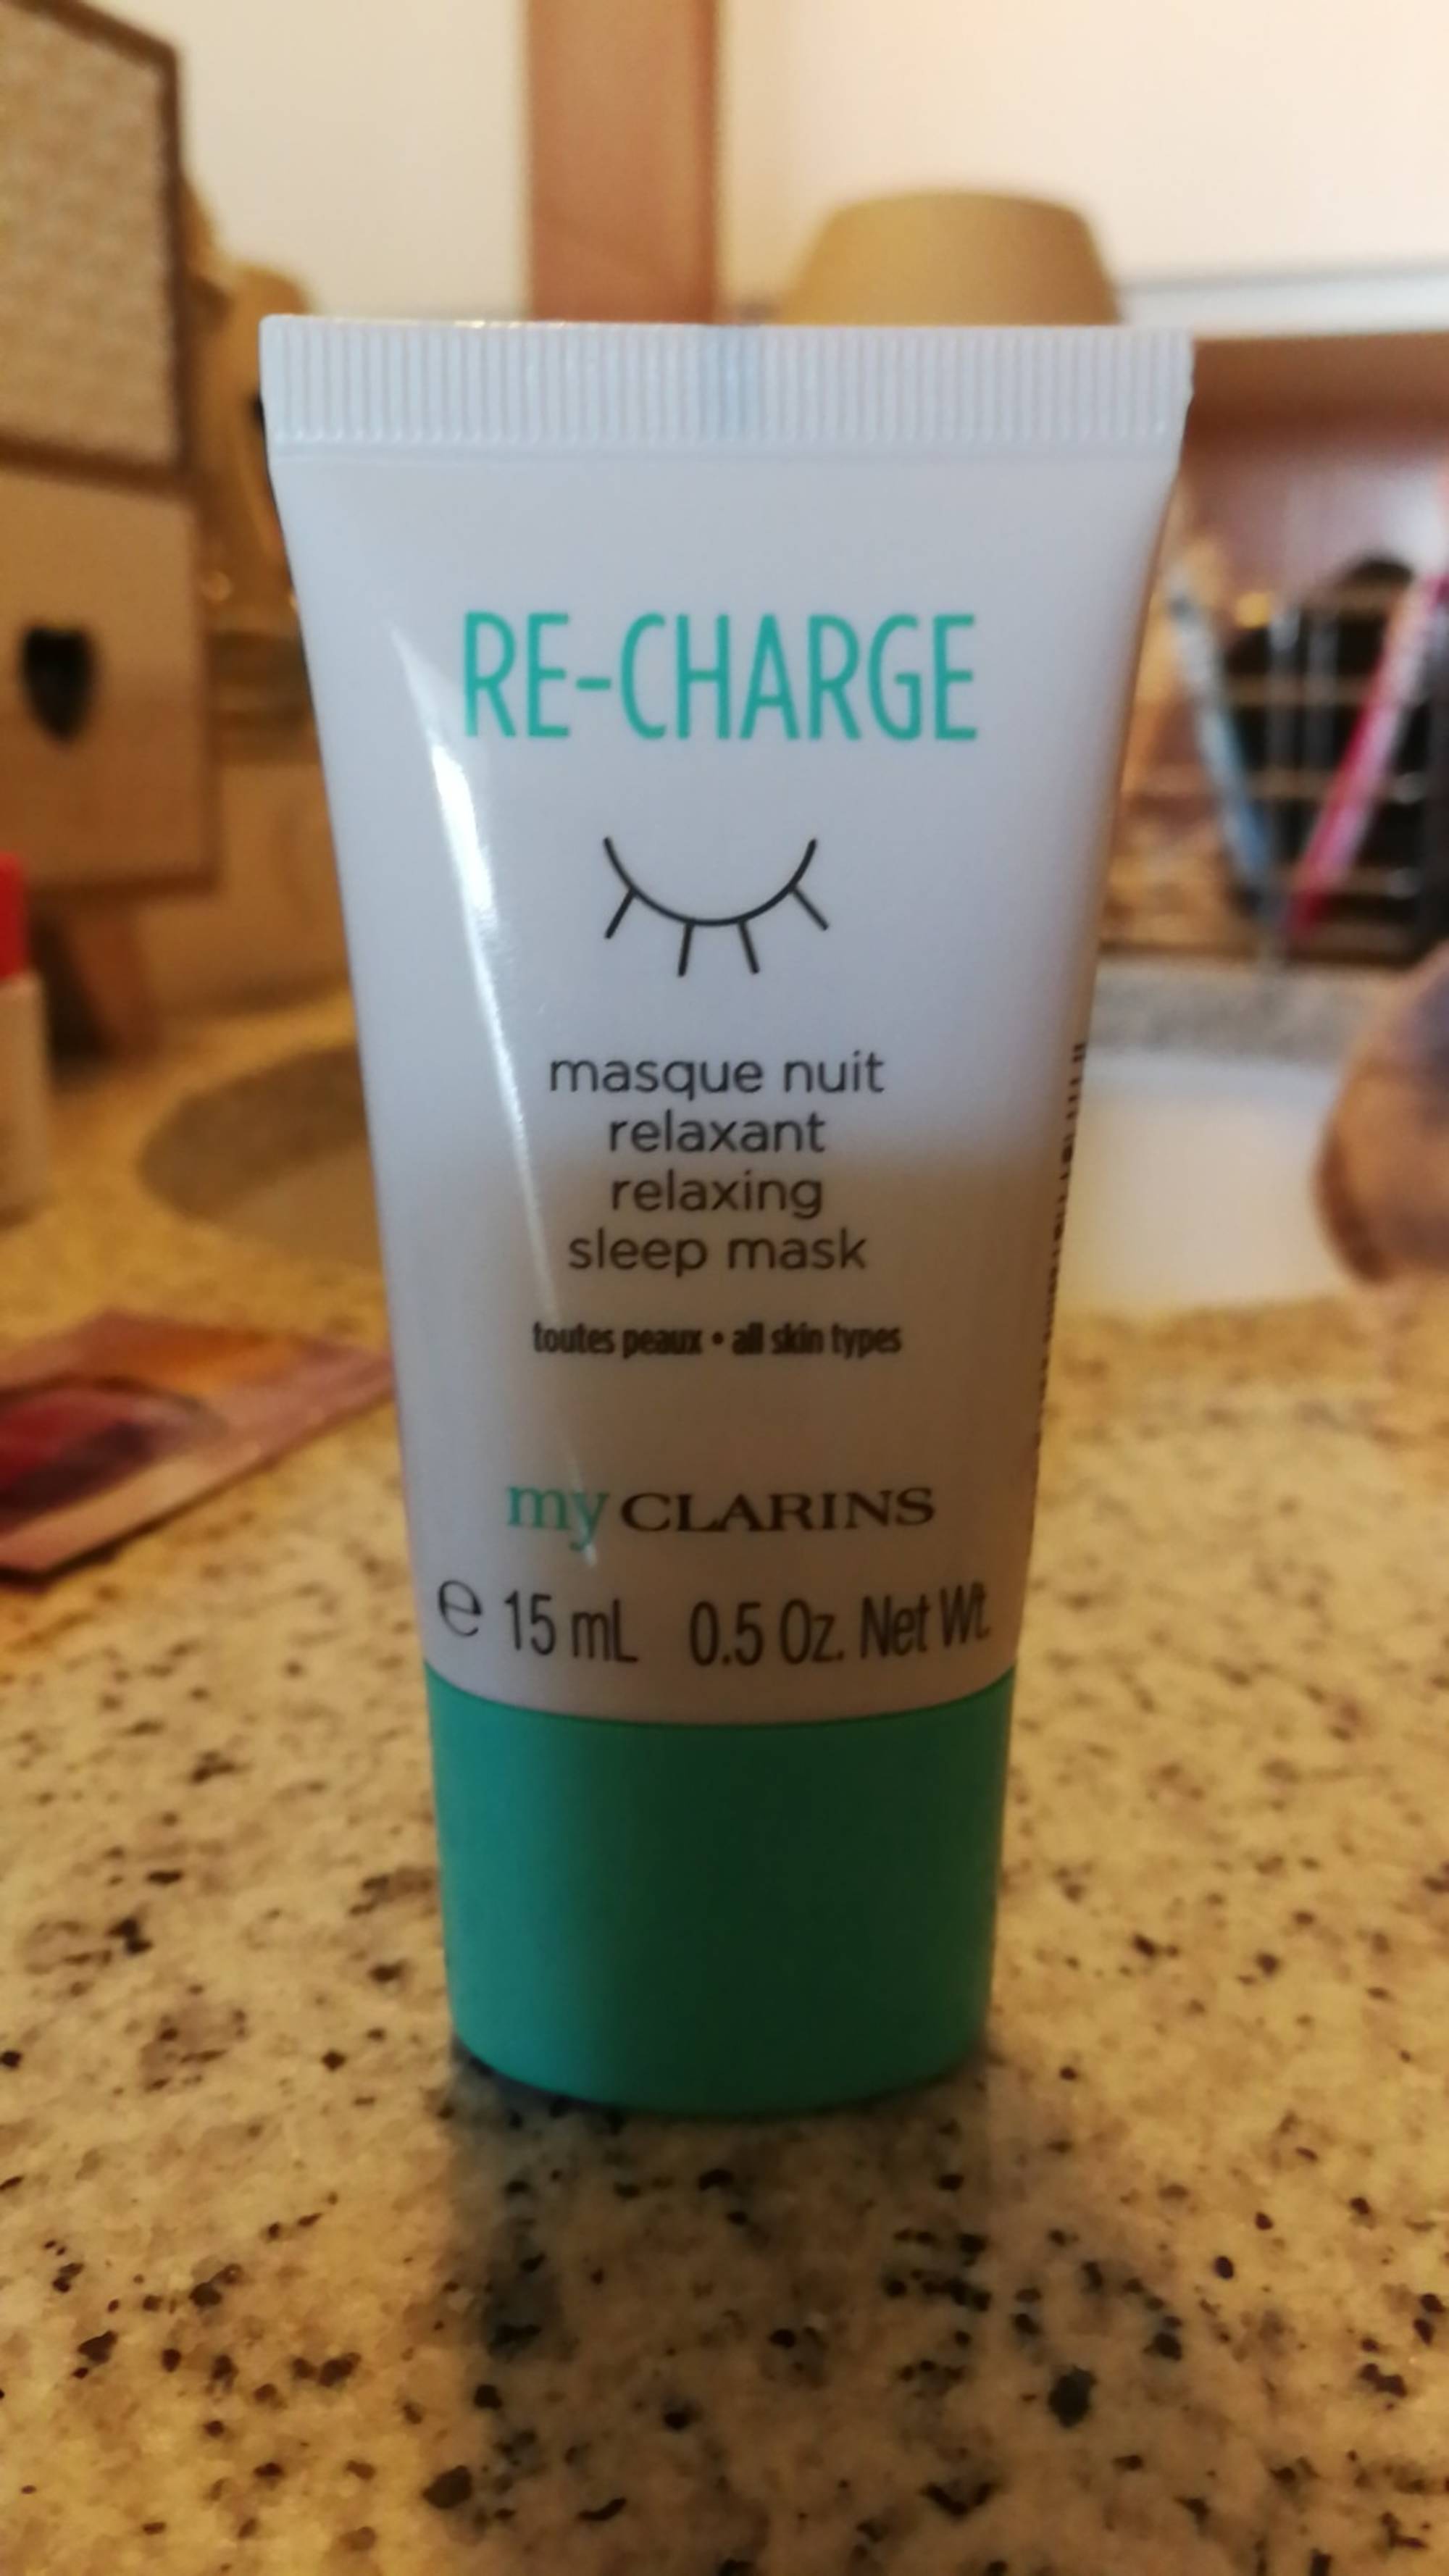 MY CLARINS - Re-charge - Masque nuit relaxant